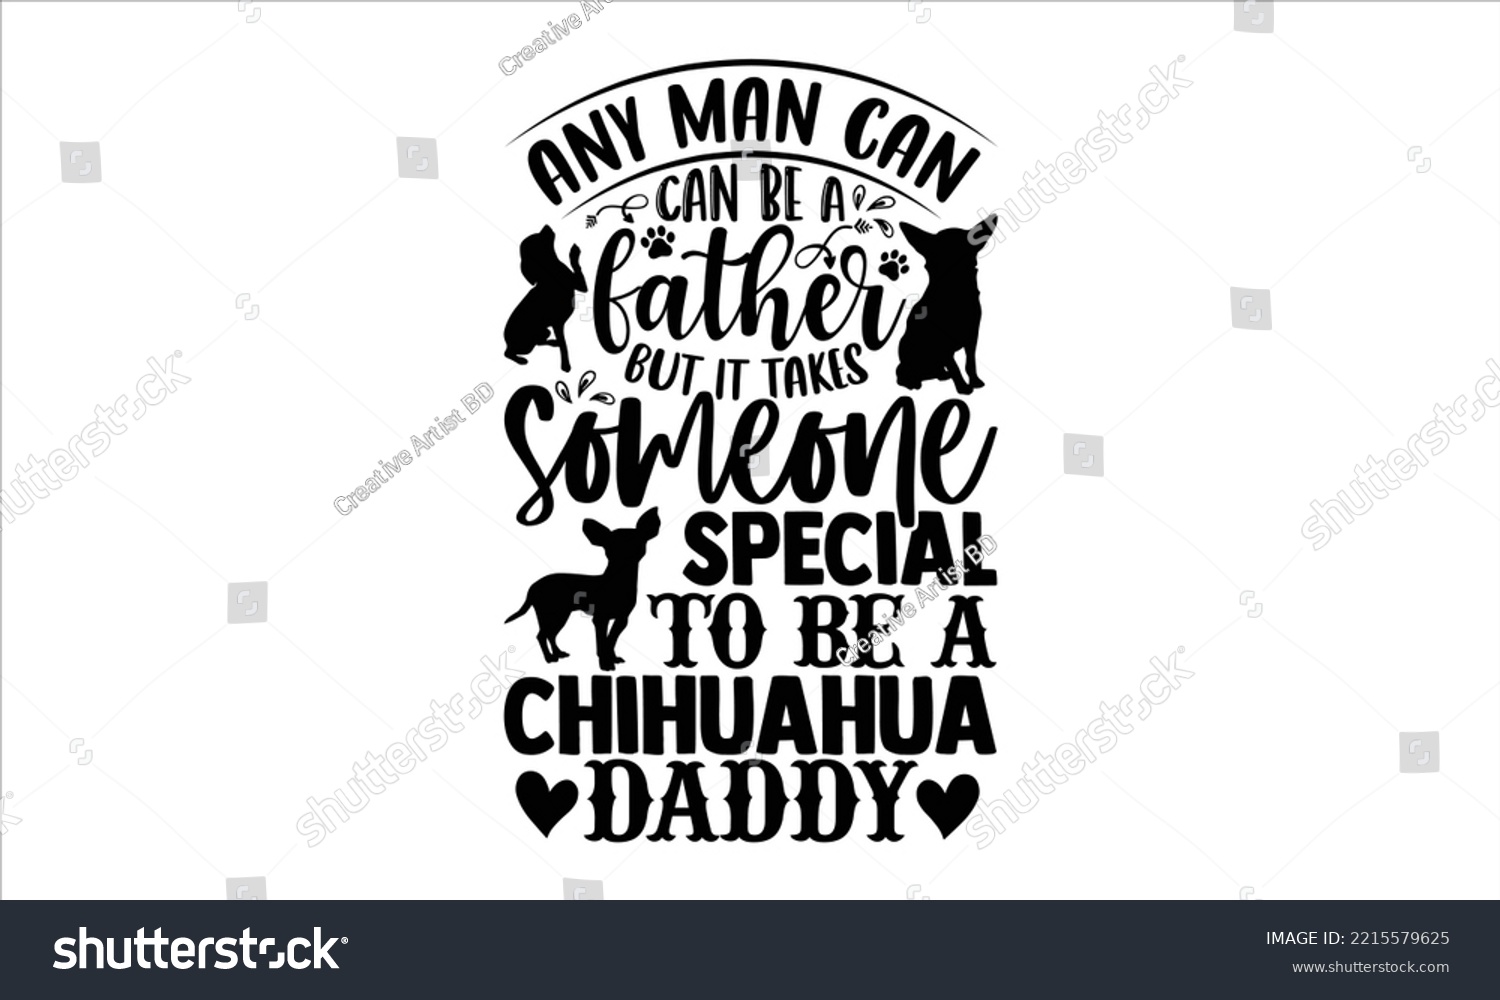 SVG of Any Man Can Be A Father But It Takes Someone Special To Be A Chihuahua Daddy - Chihuahua T shirt Design, Modern calligraphy, Cut Files for Cricut Svg, Illustration for prints on bags, posters svg